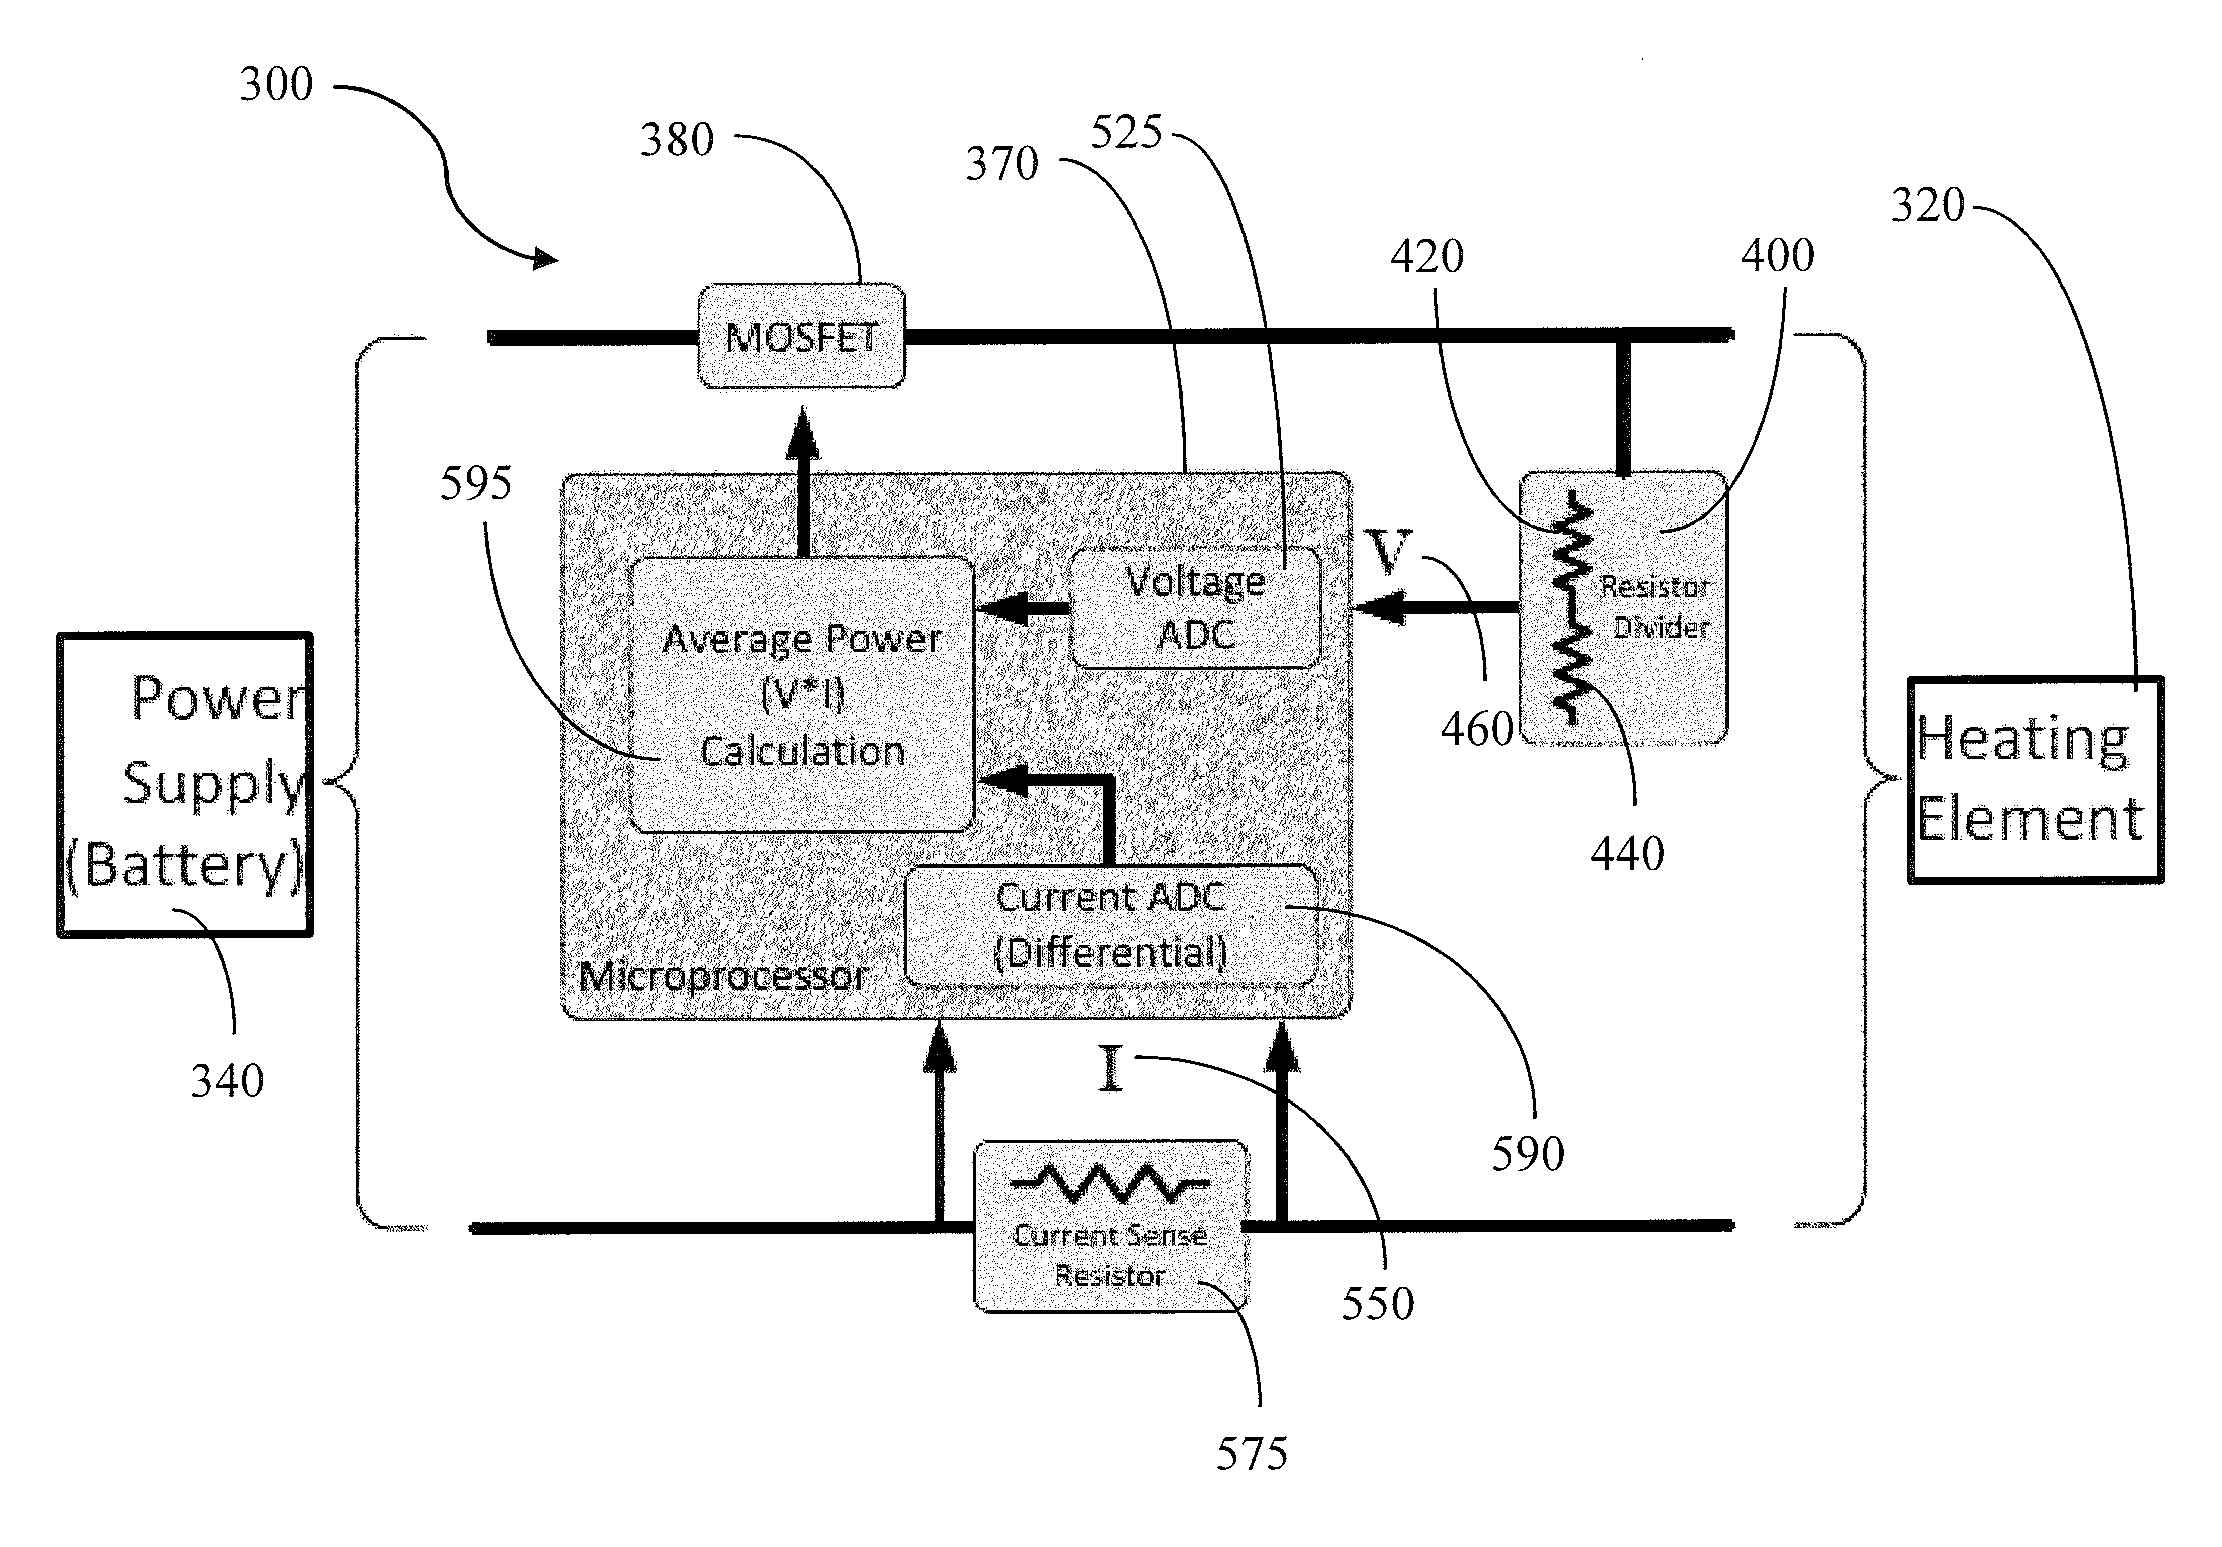 Heating control arrangement for an electronic smoking article and associated system and method